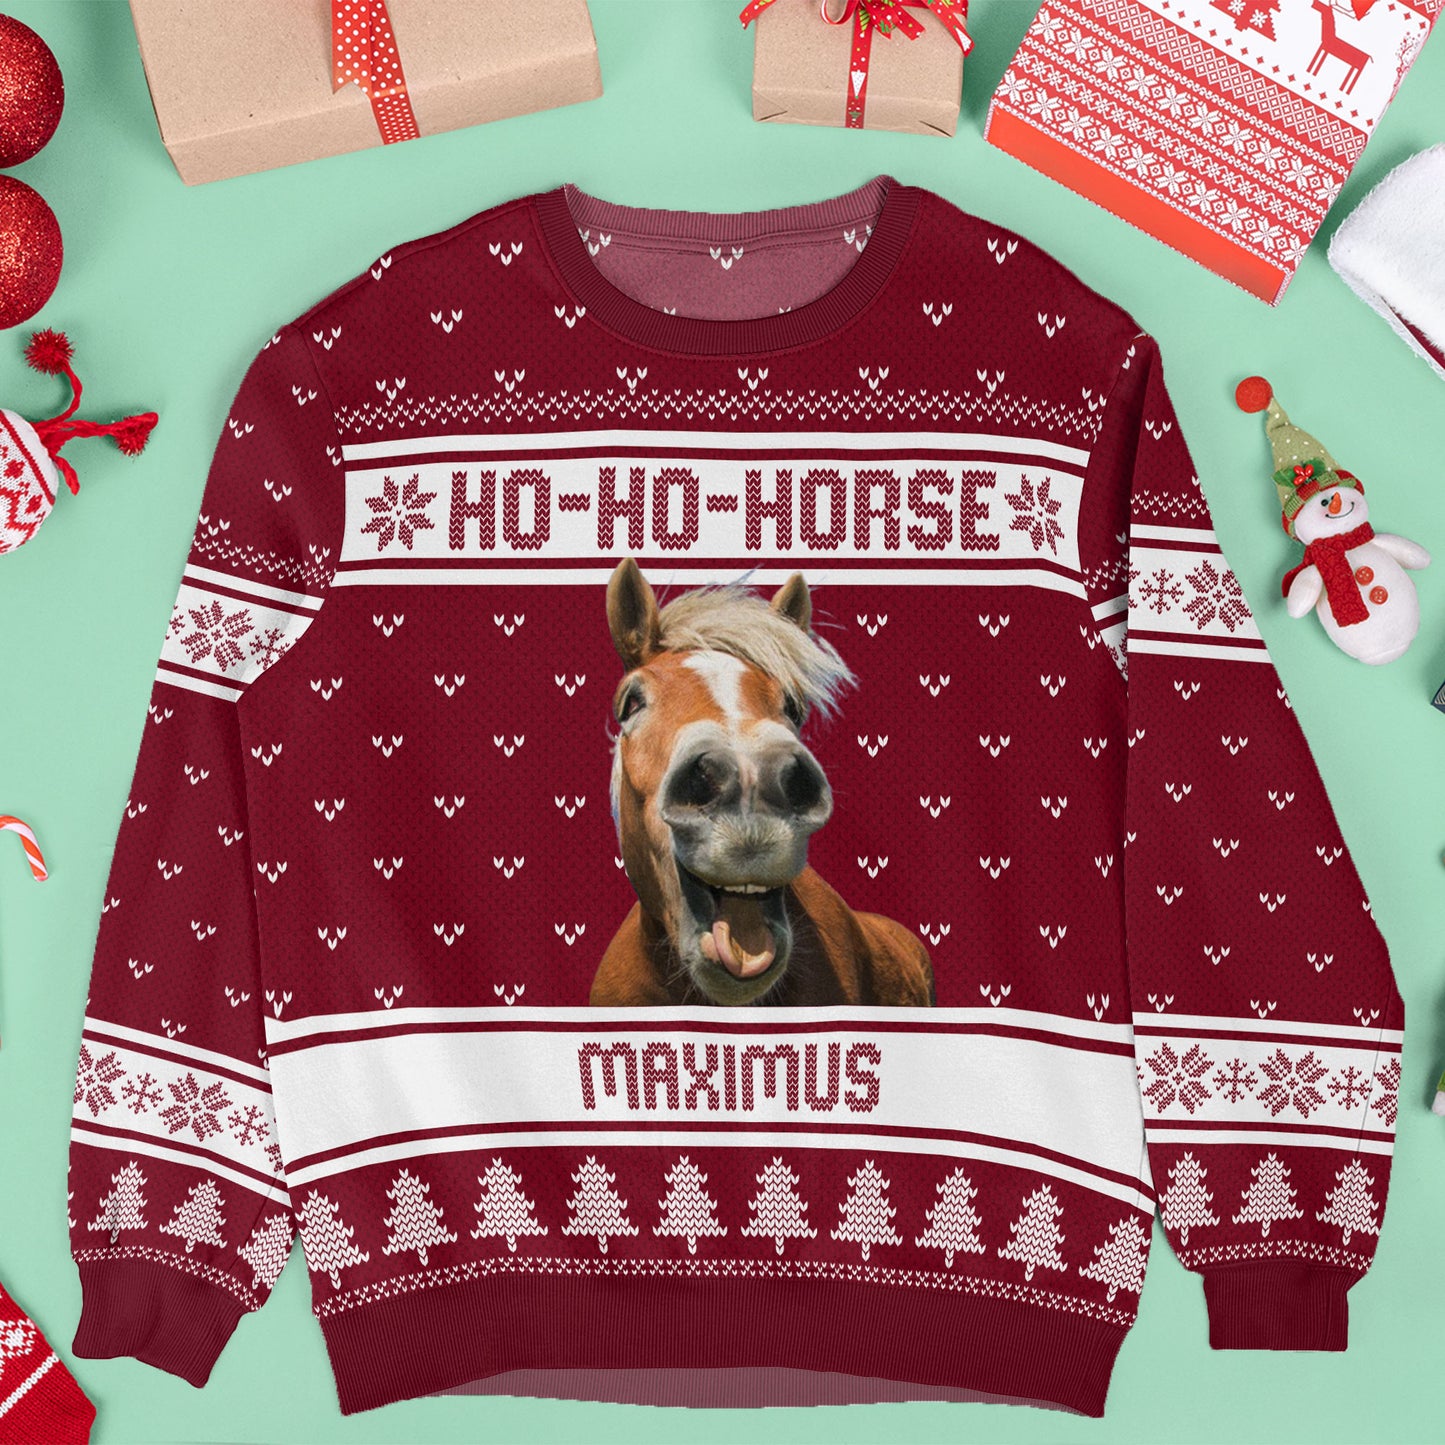 Ho-Ho-Horse - Personalized Ugly Sweater - Christmas Gift For Horse Lover, Horse Owner